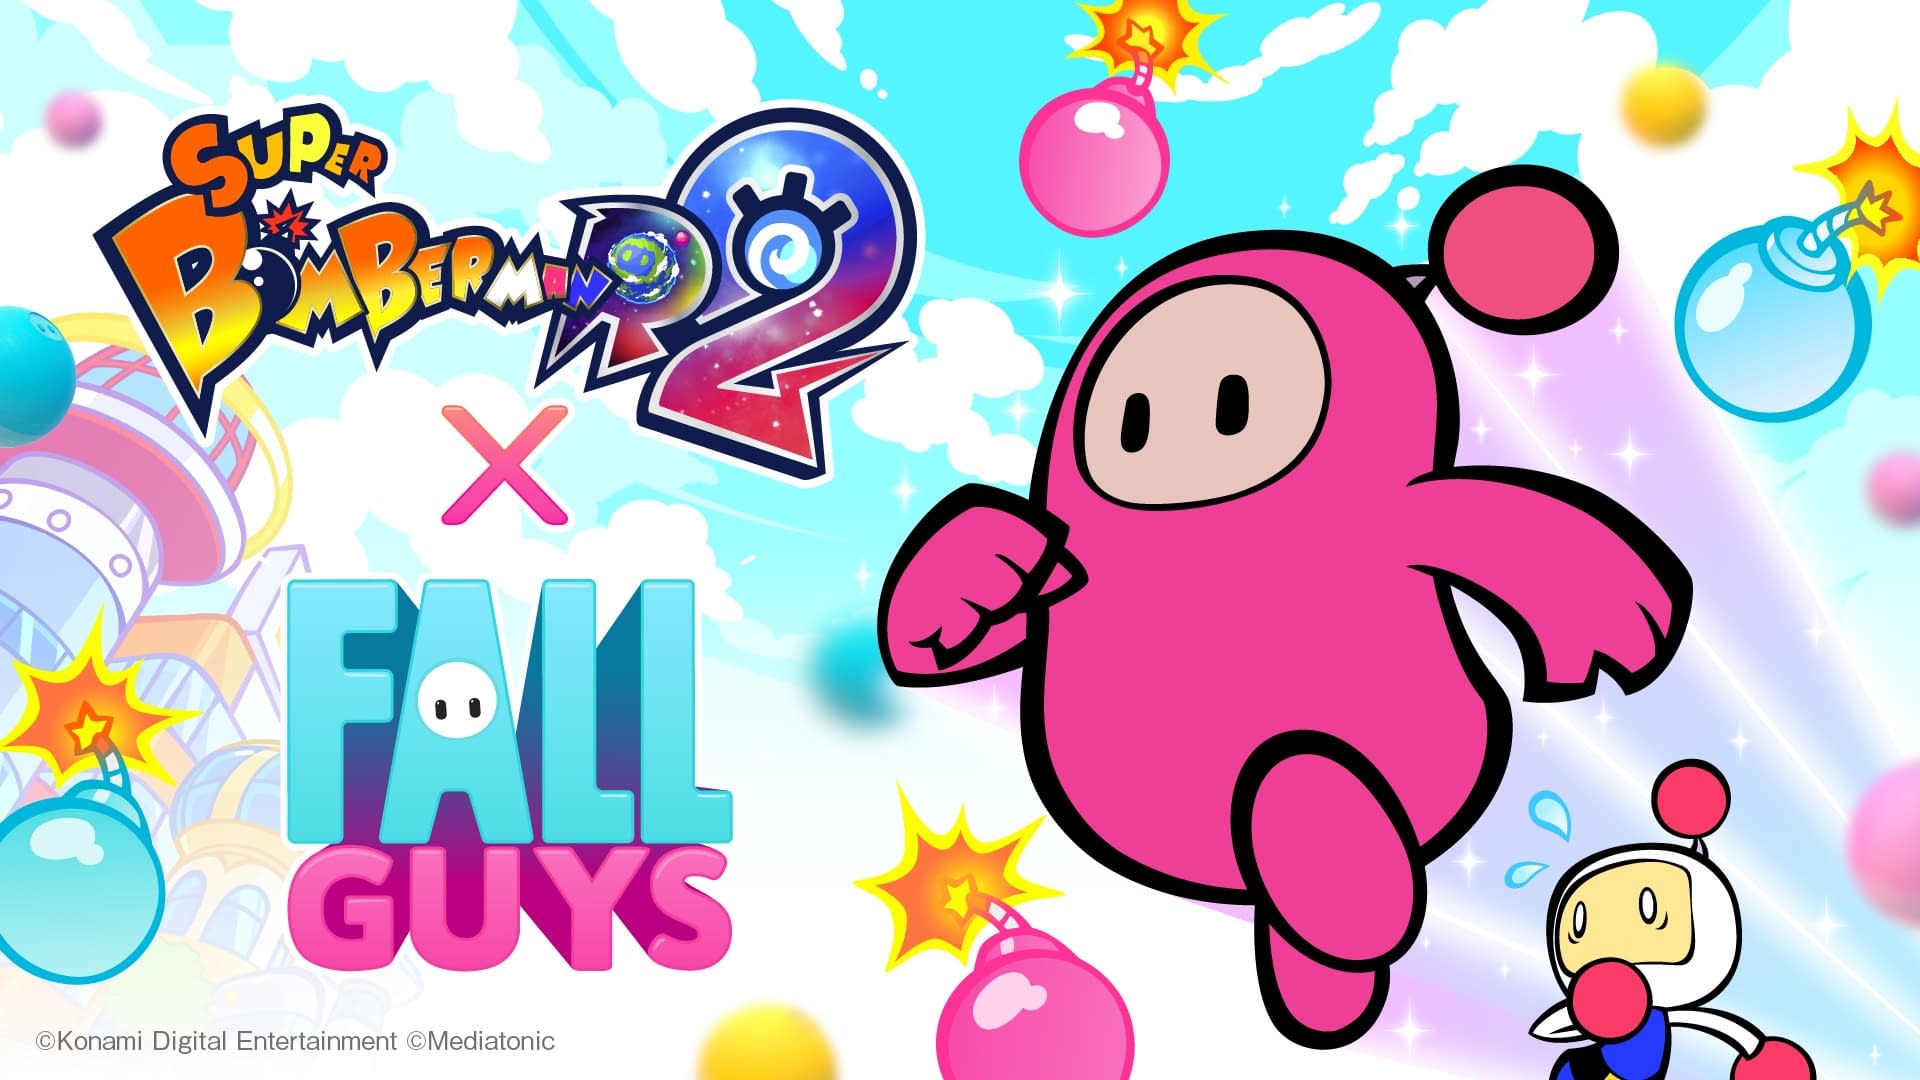 Fall Guys Comes to Run in Super Bomberman R 2!